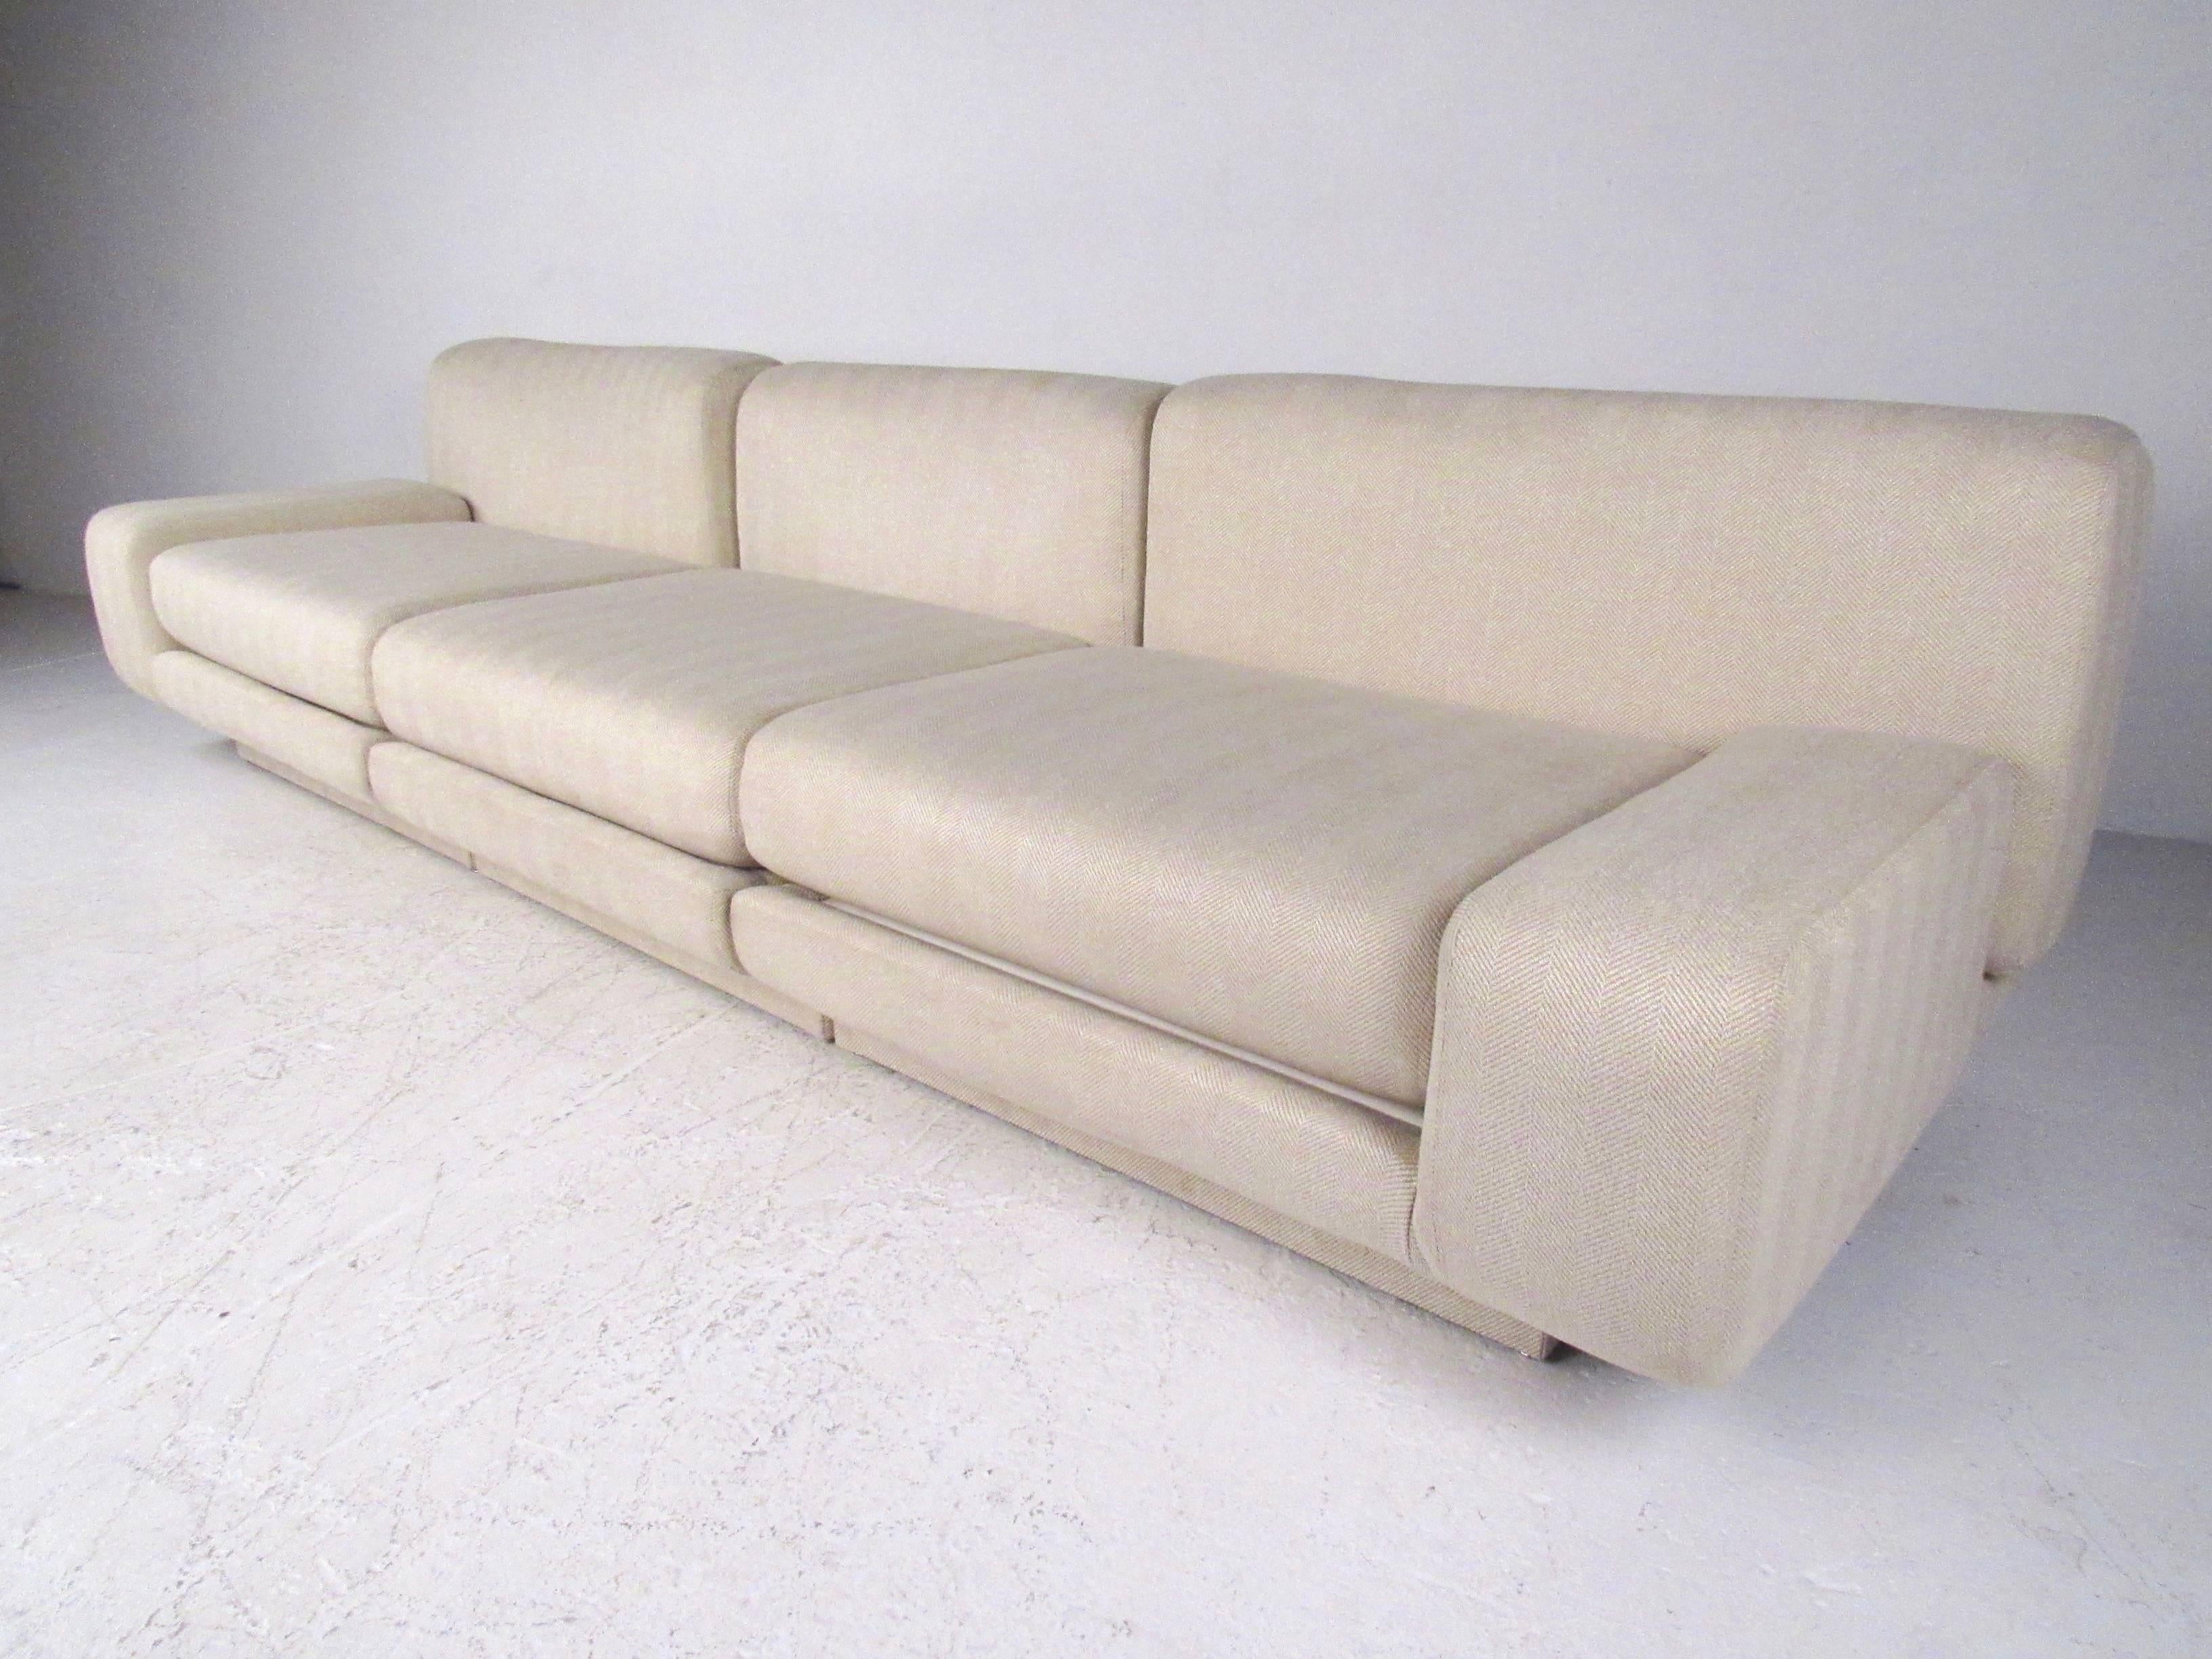 This three-piece contemporary sofa features a stylish sectional design with wonderful modern details. The simple yet comfortable design of this Milo Baughman style three-piece sofa makes a stunning addition to any interior. The two outside chairs